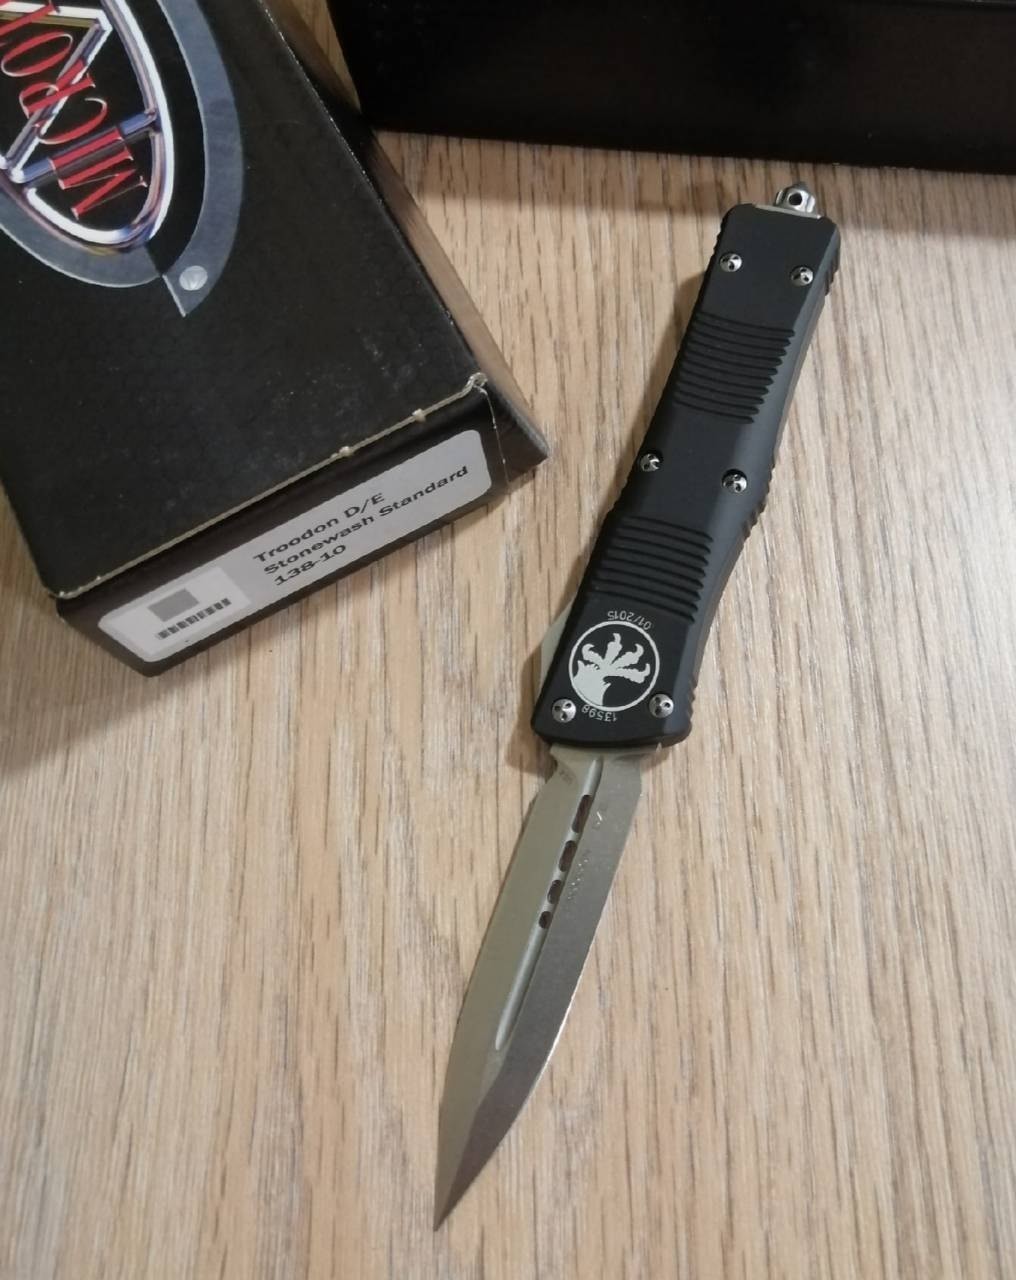 Microtech combat. Microtech Combat Troodon. Нож Microtech Combat Troodon. Microtech Combat Troodon карбон фибер. Microtech Combat Troodon Delta Frag.